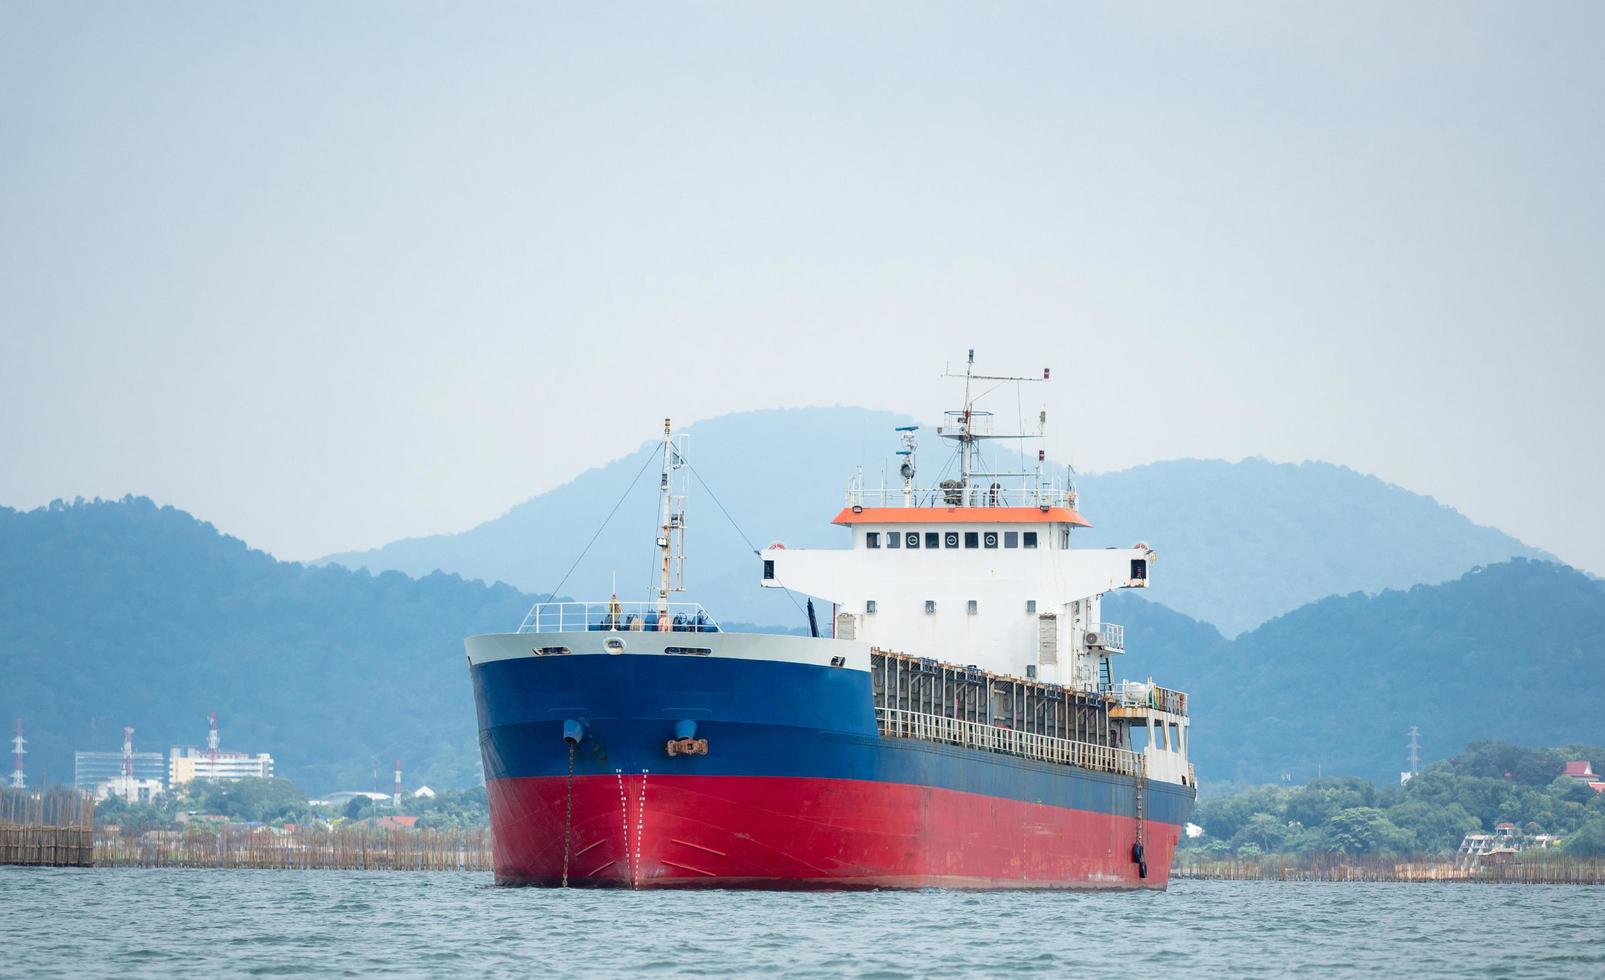 Cargo ship in the ocean with the island and mountain background,Transport ship on the sea front of dock and isle with the blue sky photo